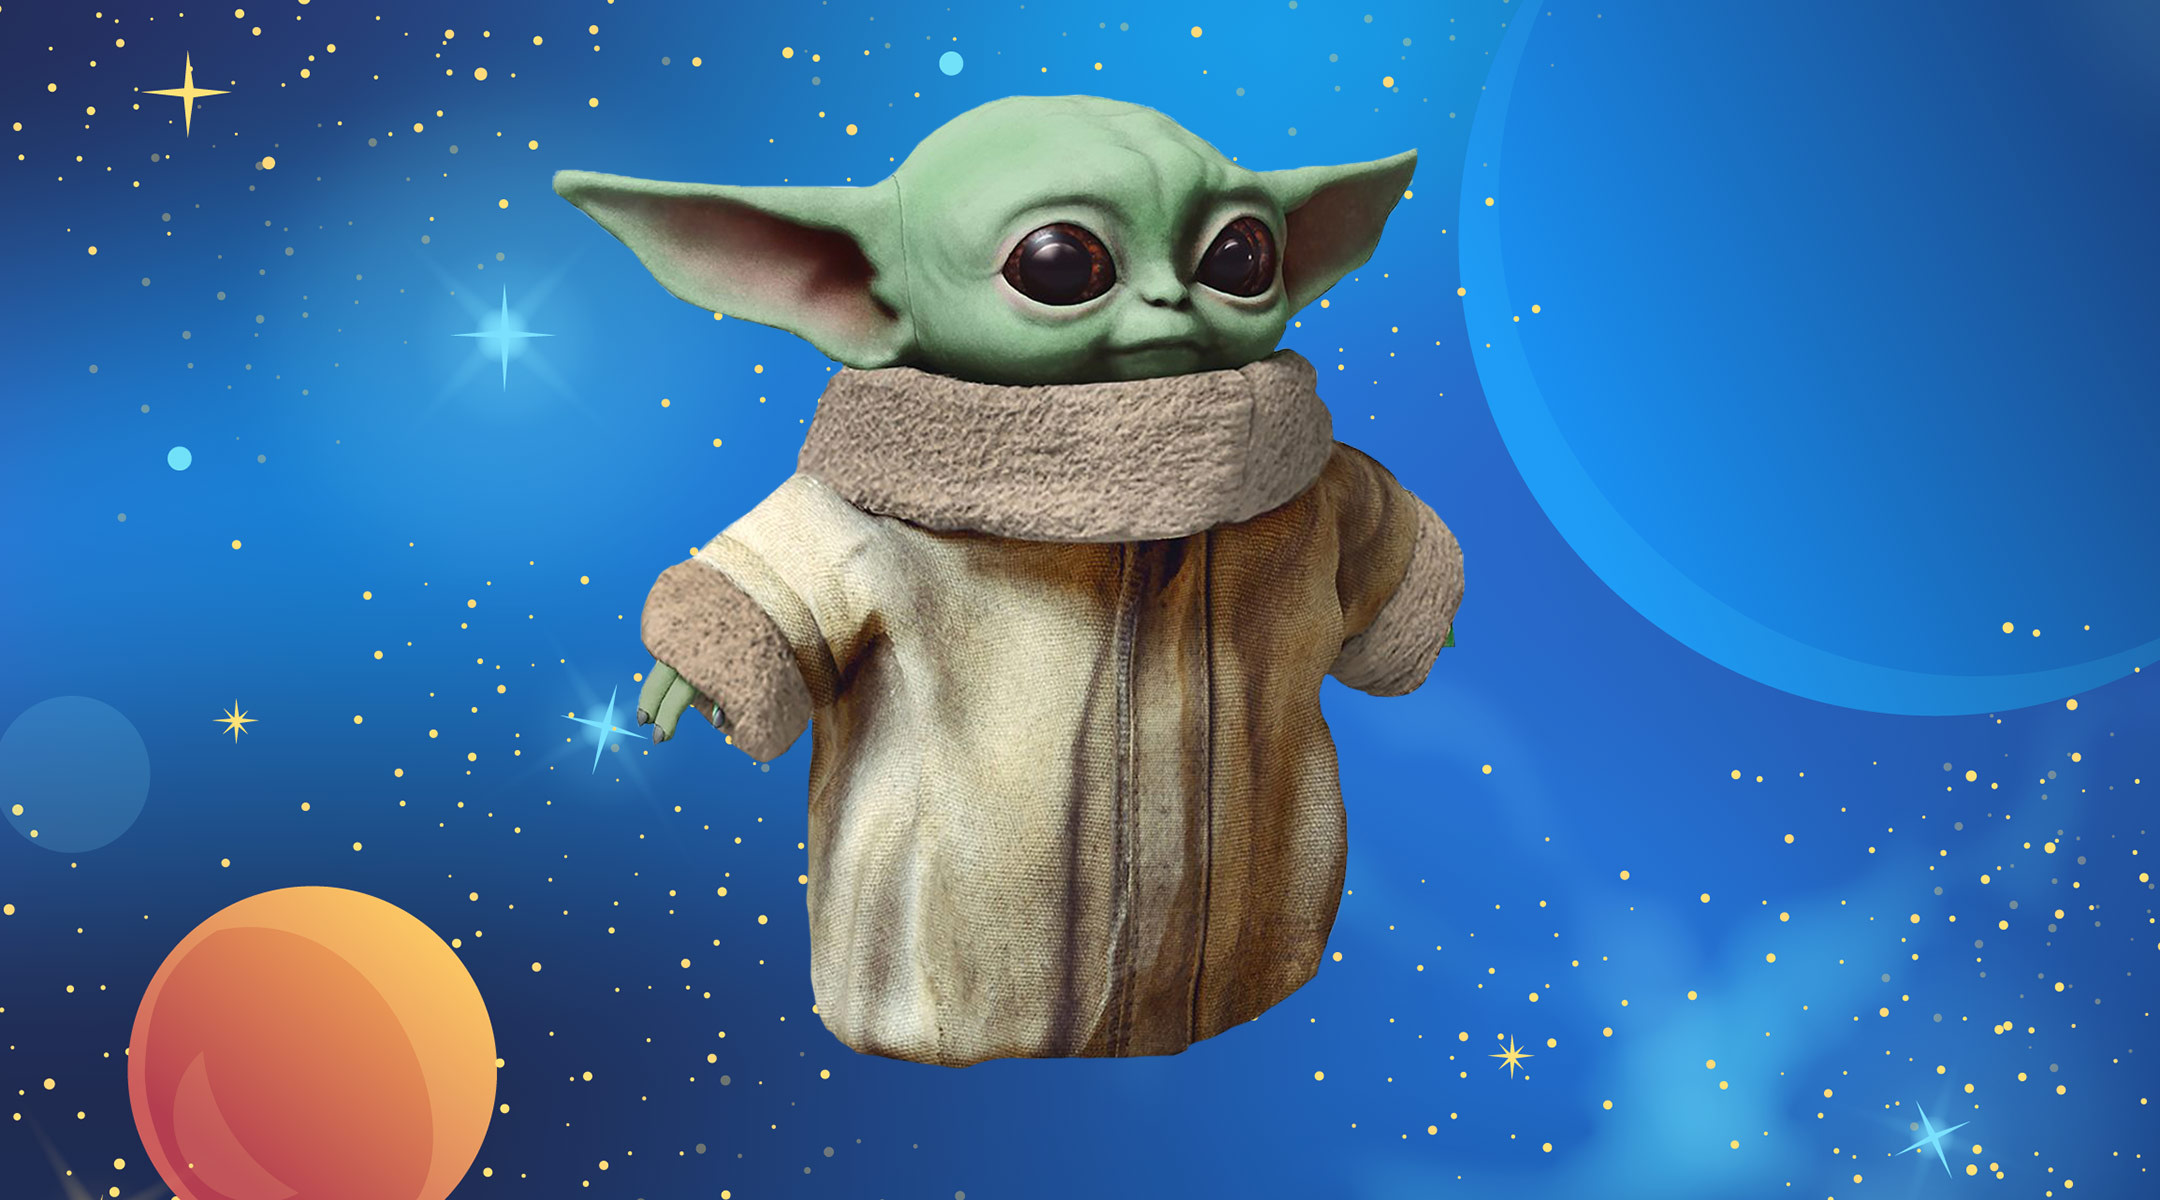 yoda baby toy released by disney plus